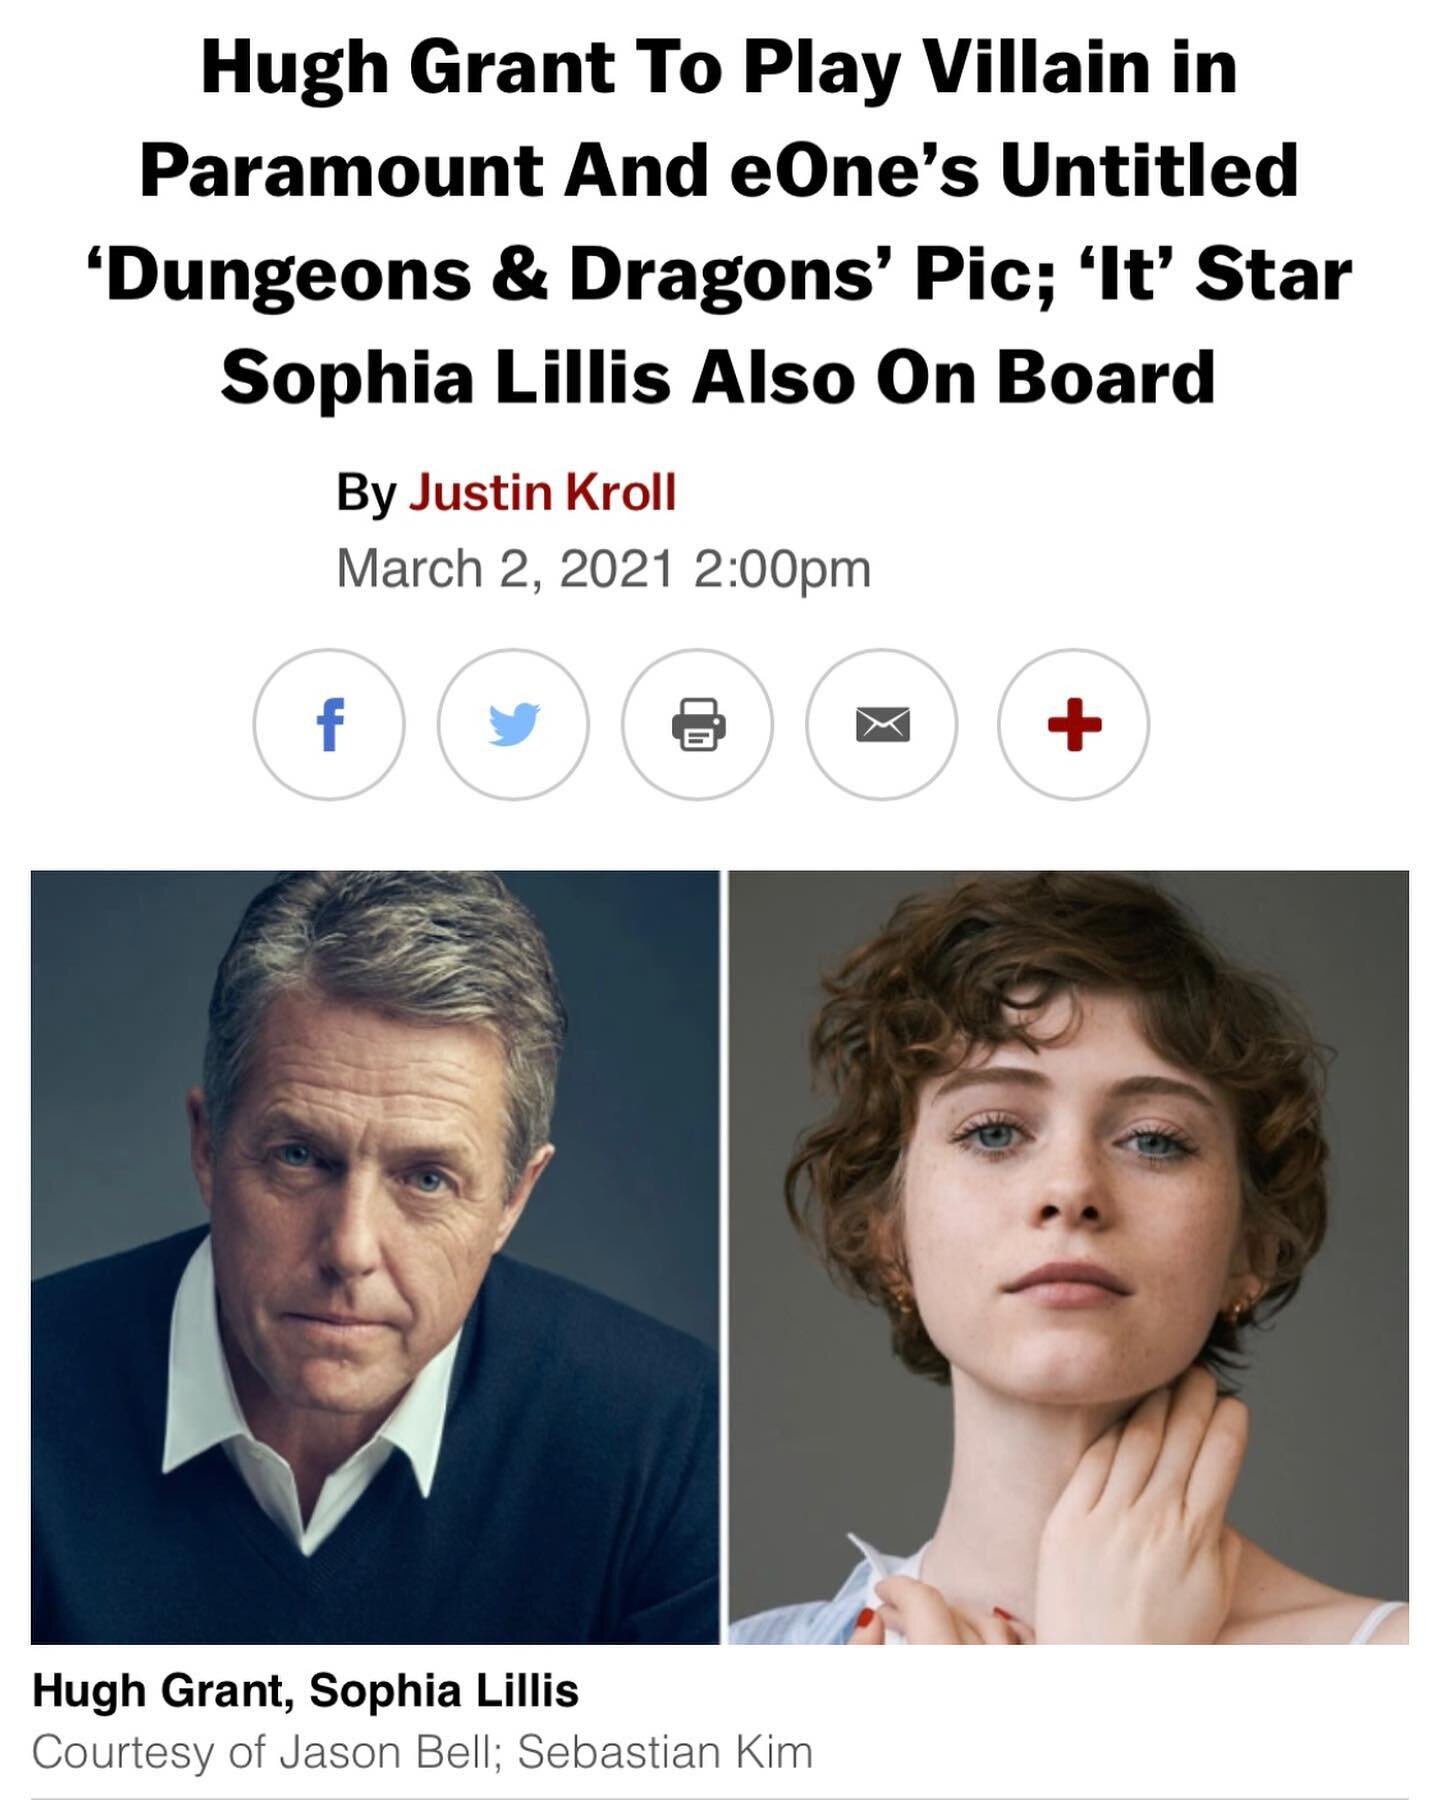 Can&rsquo;t wait for this! Congrats @sophialillis #dungeonsanddragons 🎉